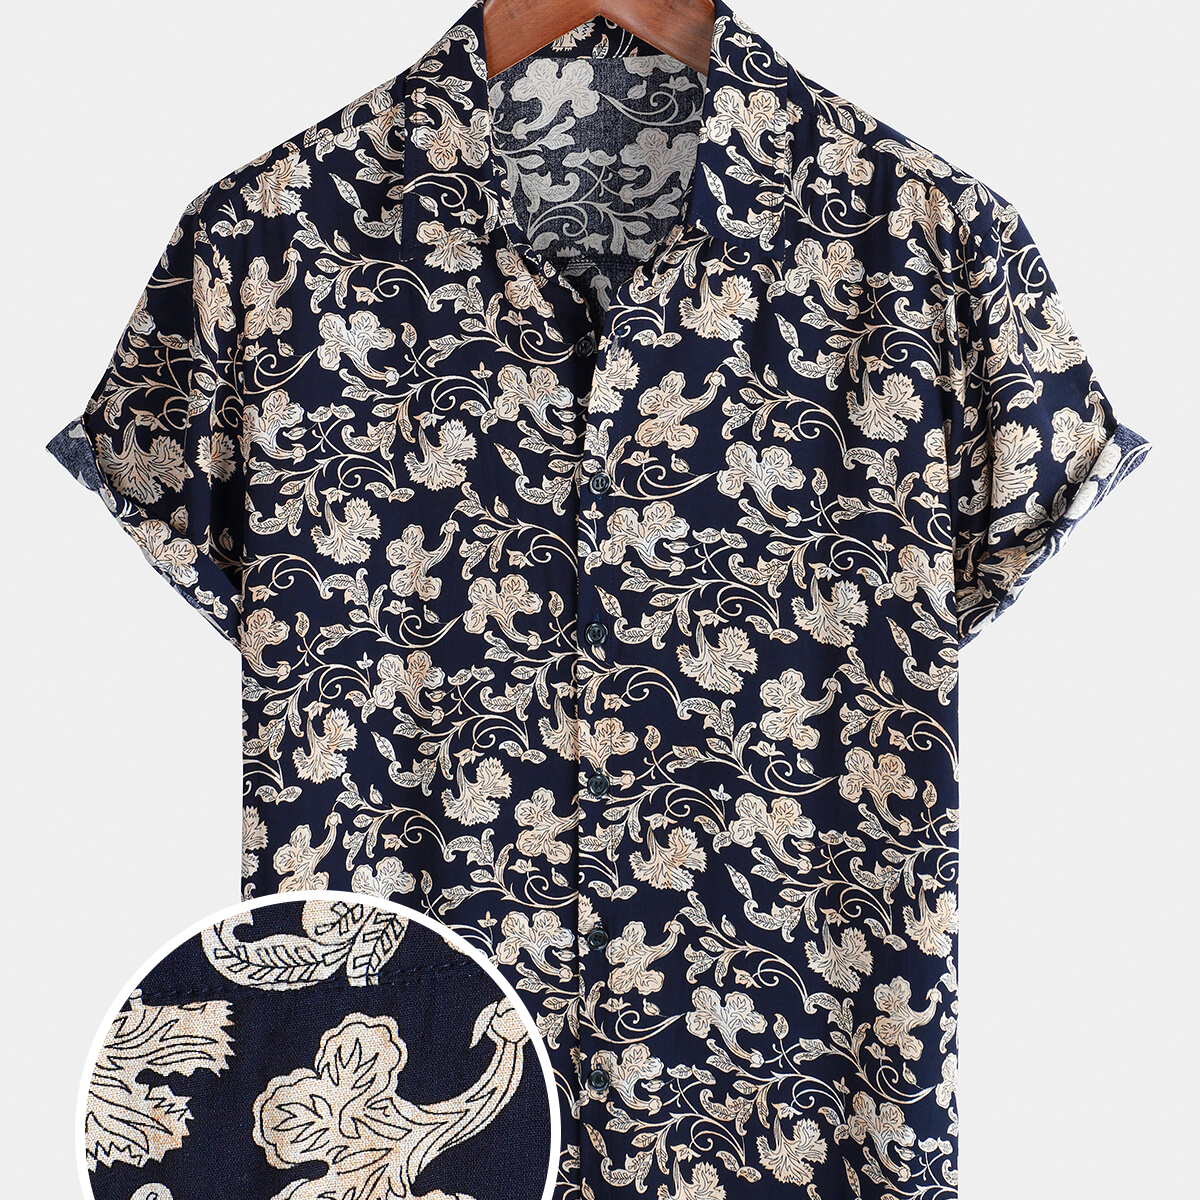 Men's Holiday Casual Summer Floral Vintage Short Sleeve Beach Button Up Shirt